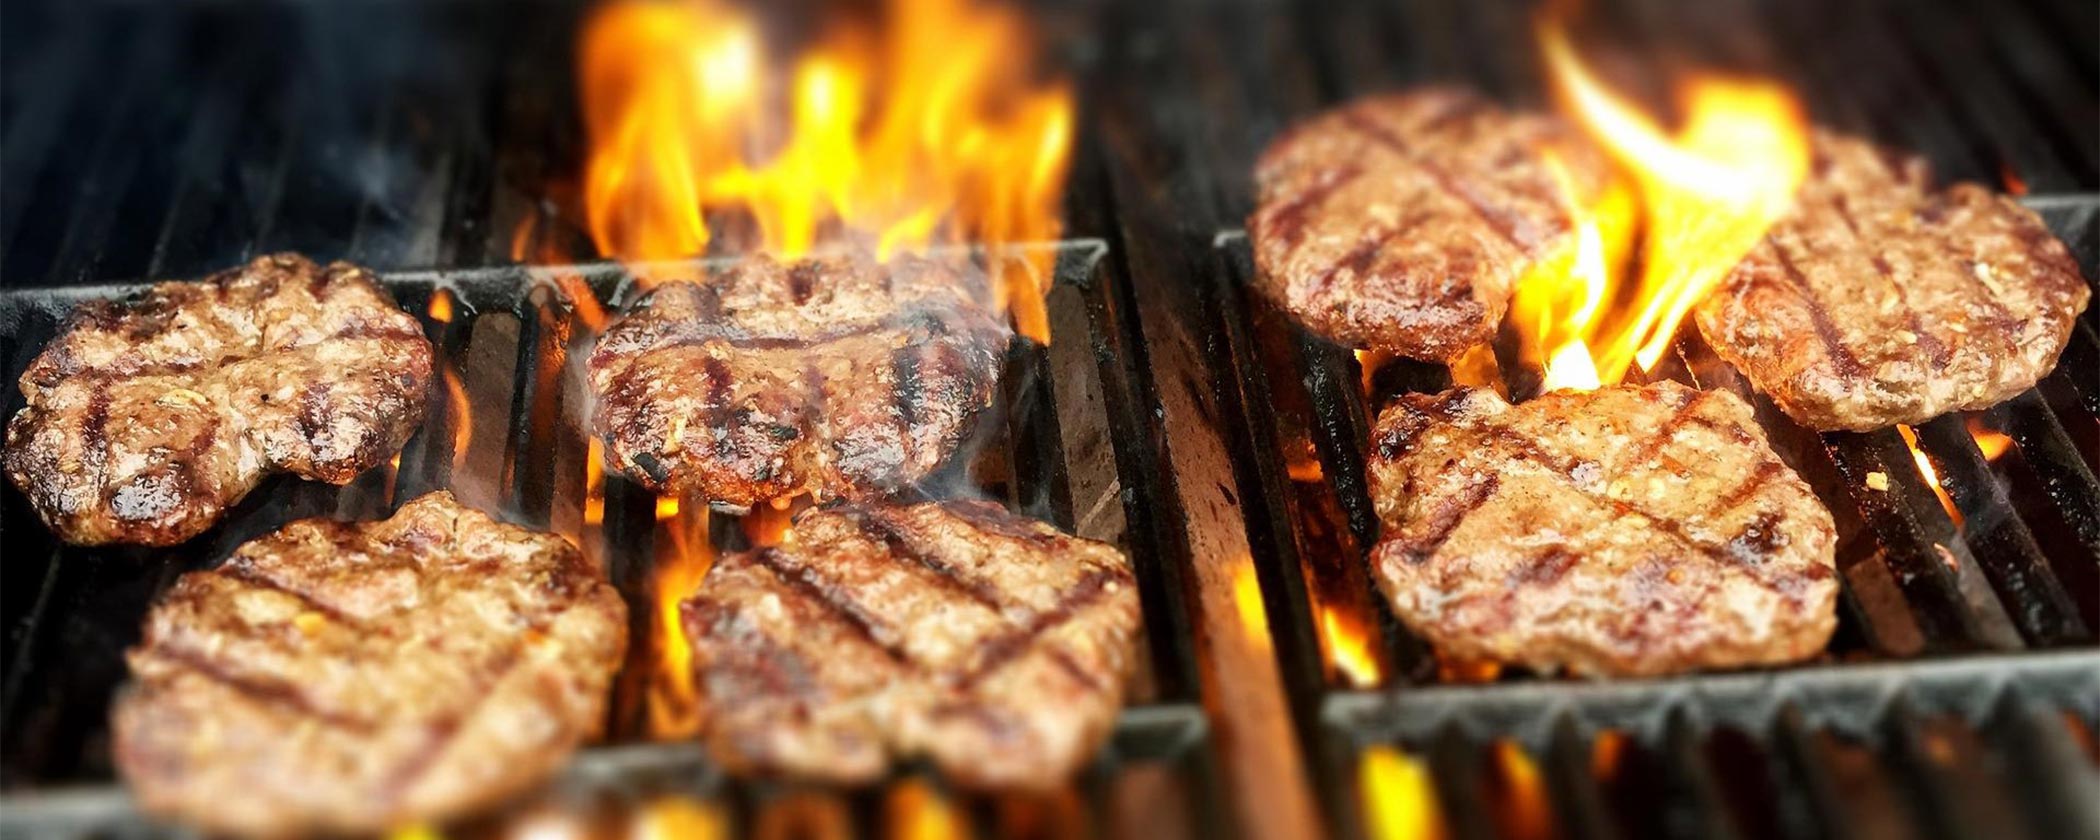 featured image for Let’s Get Grilling!